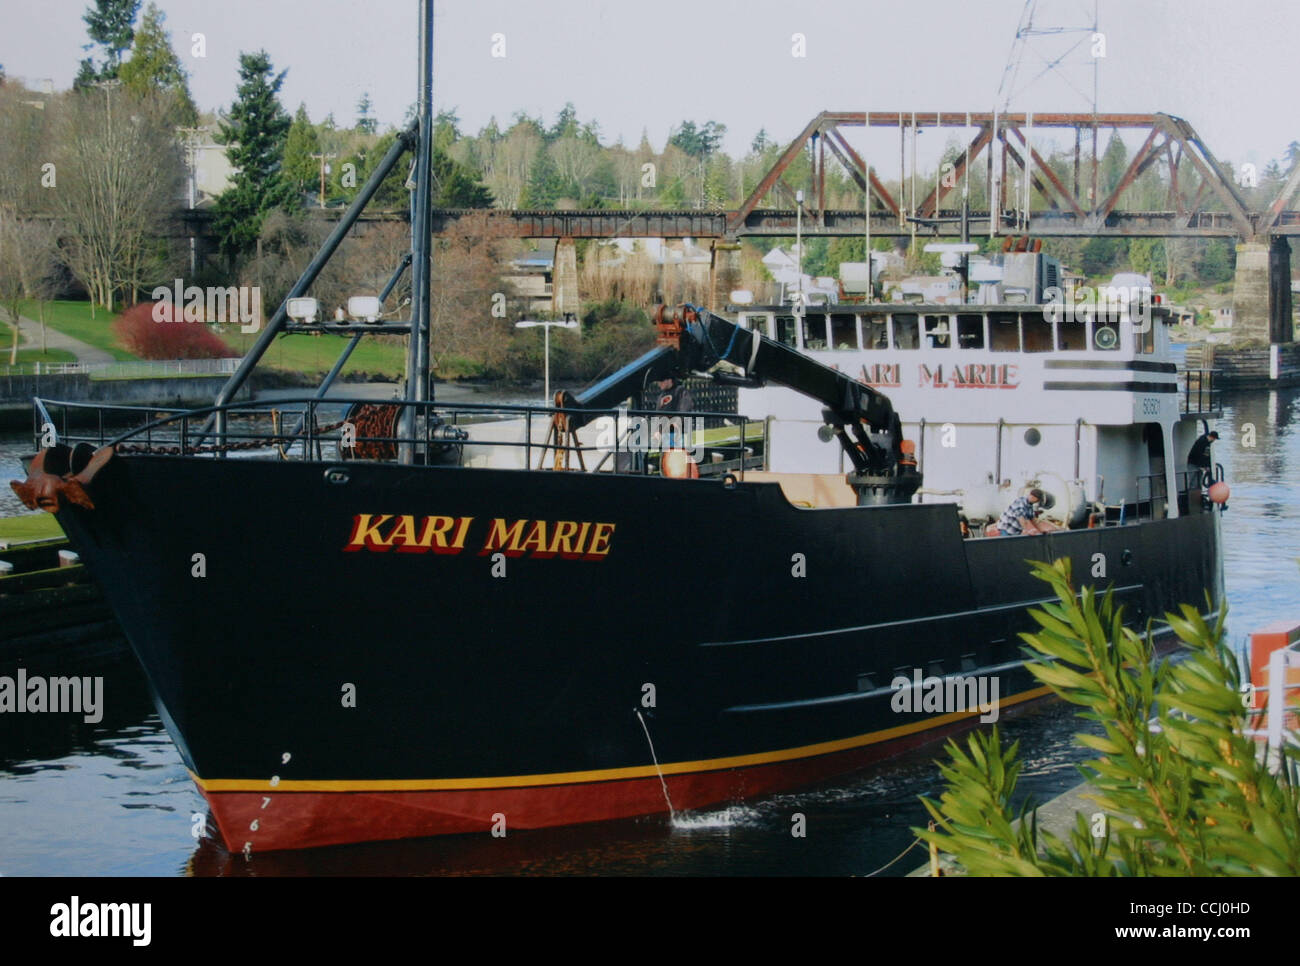 The 123 foot ship Kari Marie, a Bering Sea crabber owned and